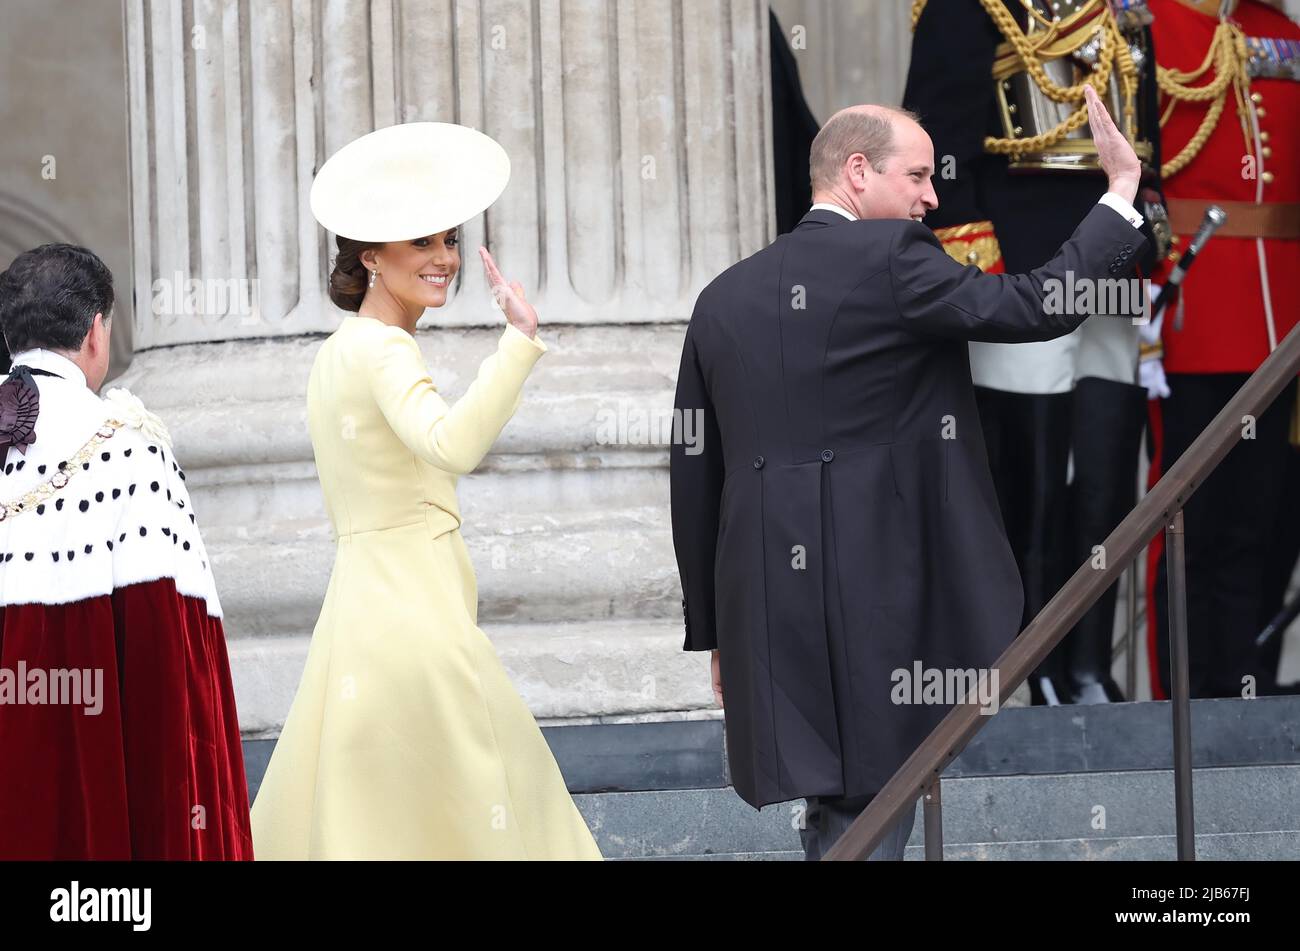 London, UK. 3rd June, 2022. Prince William, Duke of Cambridge, Catherine, Duchess of Cambridge arrive for the thanksgiving Service for HRH Queen Elizabeth II to celebrate her Platinum Jubilee at St Paul's Cathedral in London. Credit: James Boardman/Alamy Live News Stock Photo